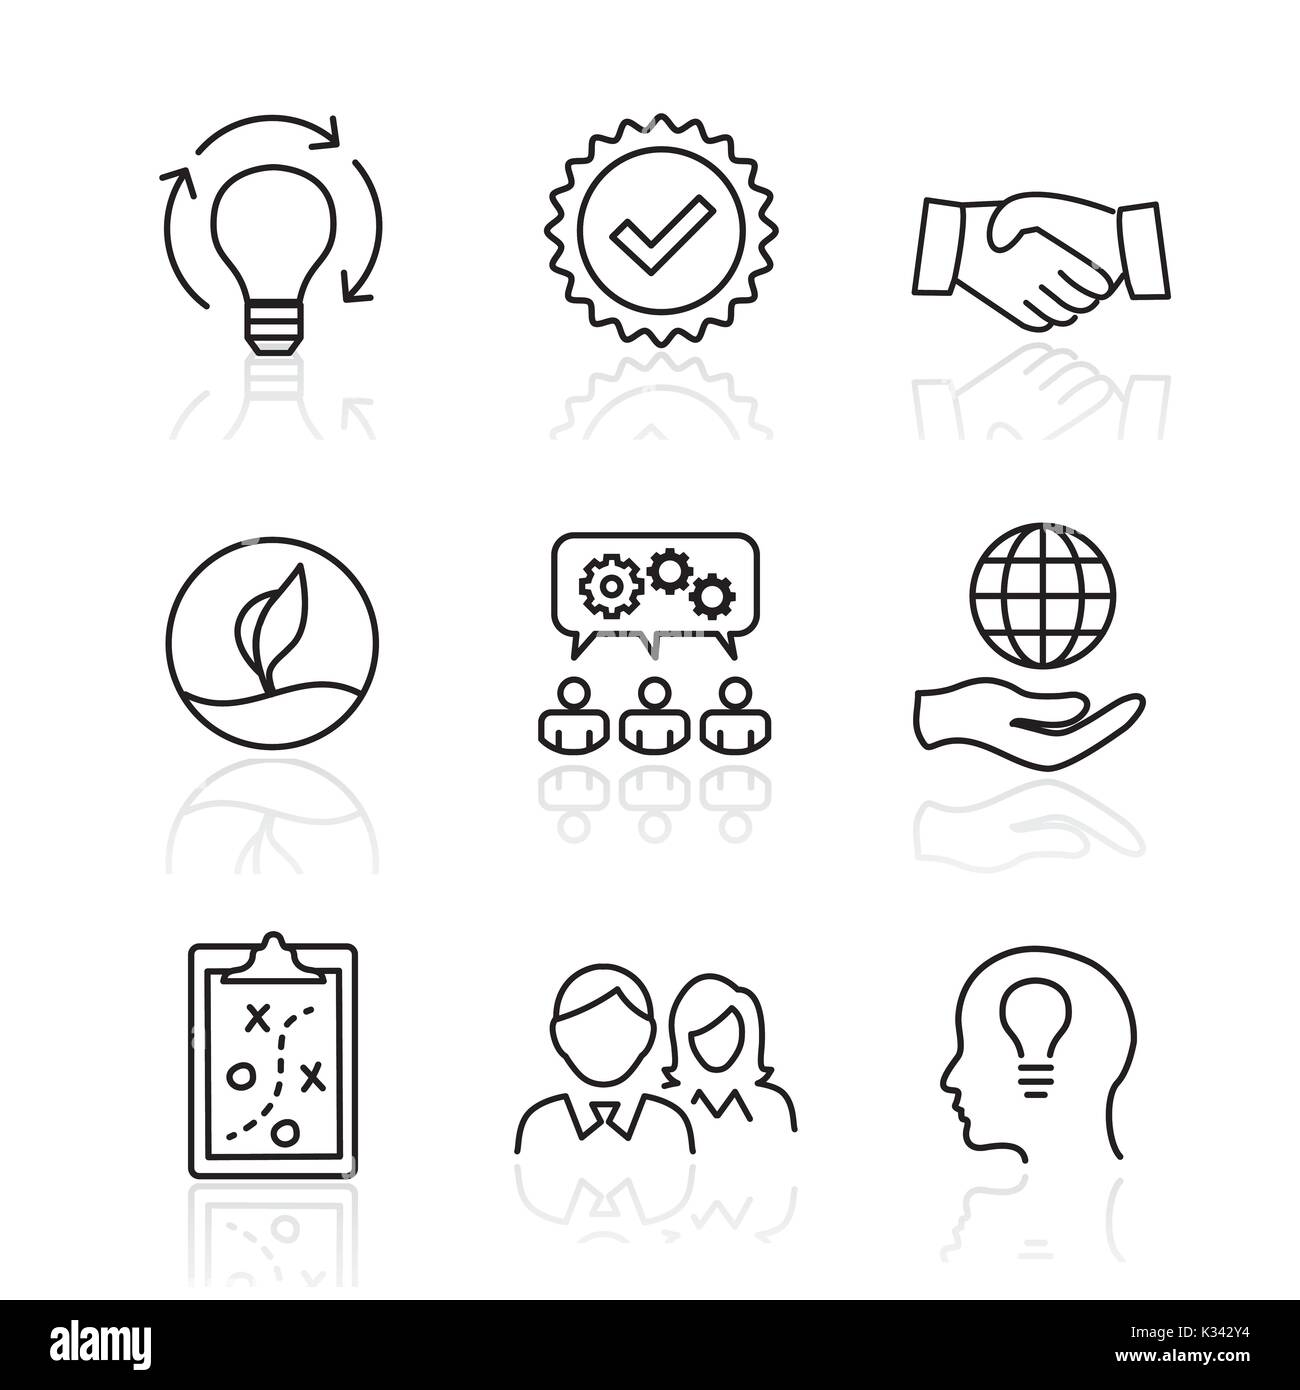 Core Values - Mission, integrity value icon set with vision, honesty, passion, and collaboration as the goal / focus Stock Vector